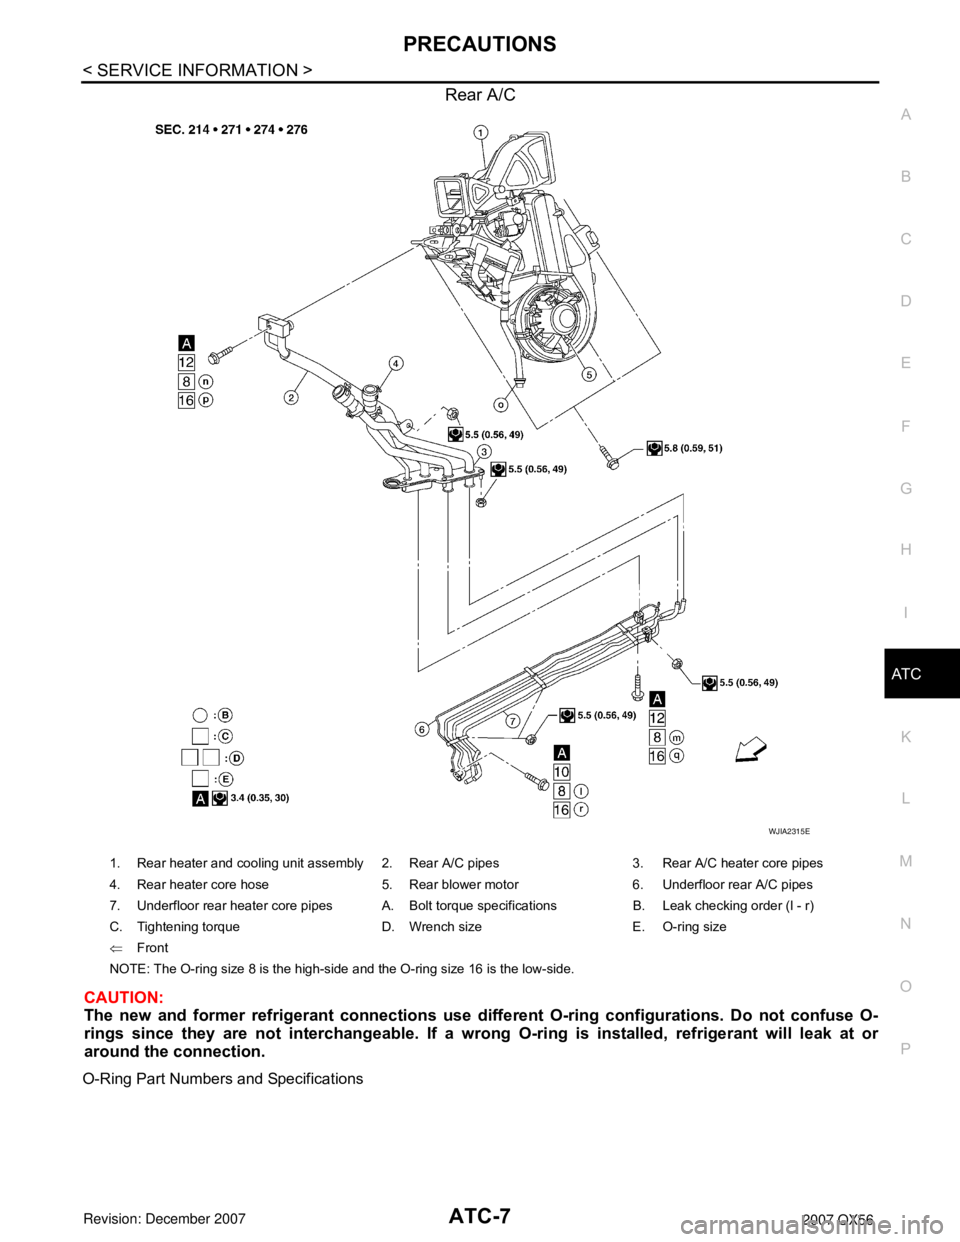 INFINITI QX56 2007  Factory Service Manual 
PRECAUTIONSATC-7
< SERVICE INFORMATION >
C
DE
F
G H
I
K L
M A
B
AT C
N
O P
Rear A/C
CAUTION:
The new and former refrigerant connections use diffe rent O-ring configurations. Do not confuse O-
rings s